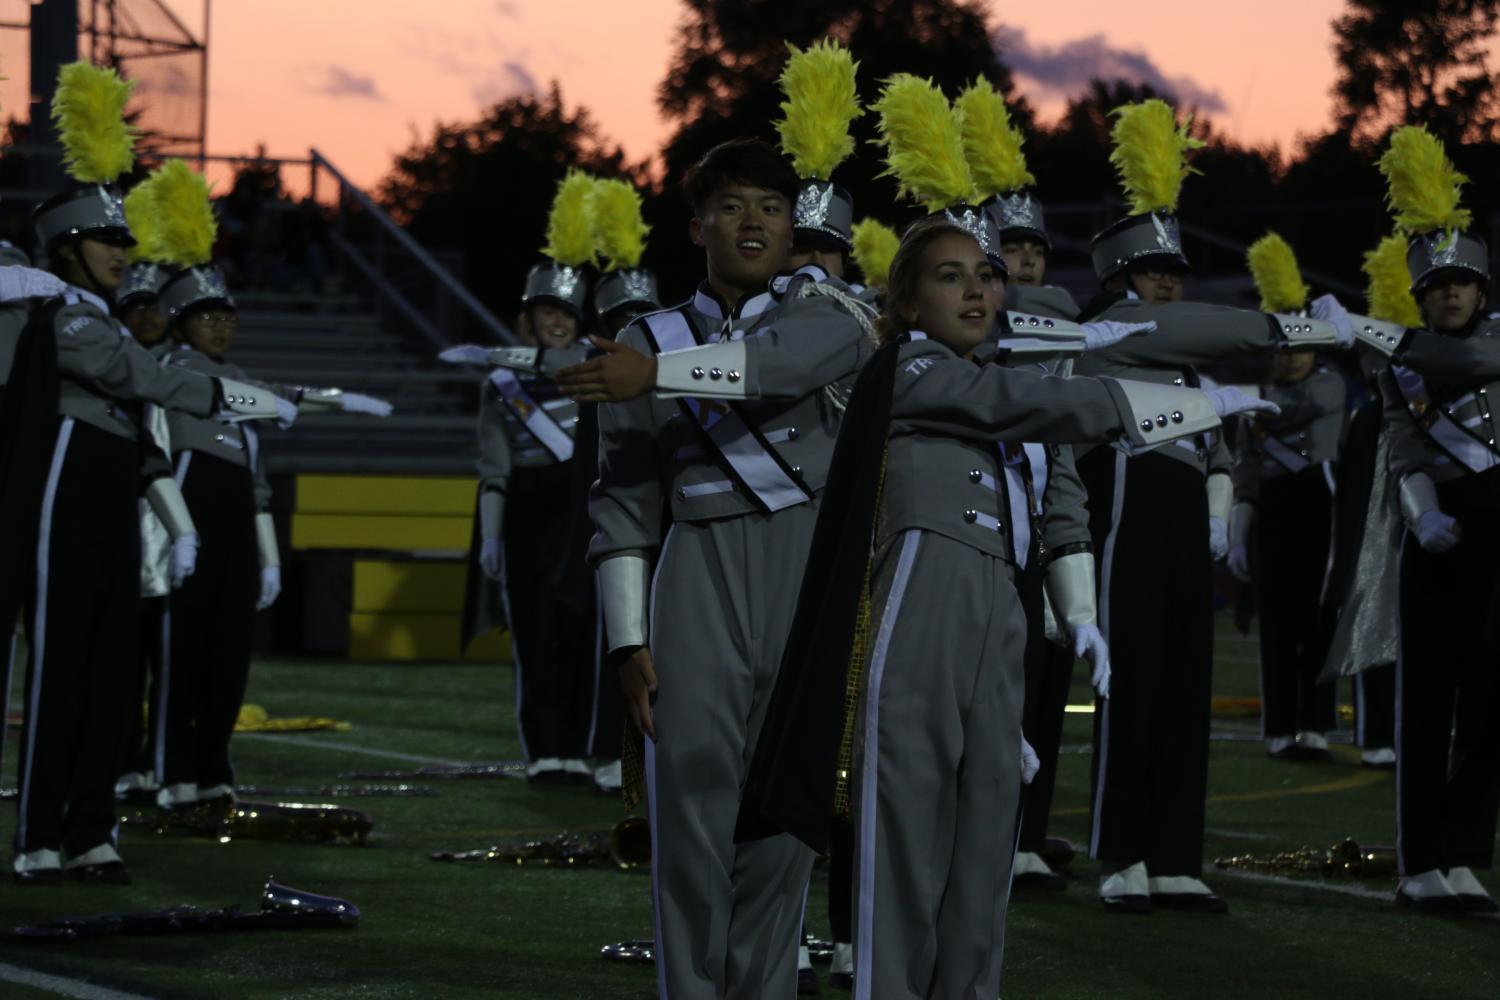 Joining the marching band on the field, Drum Majors, seniors Natalie Fisher and Richard Yan dance with each other.